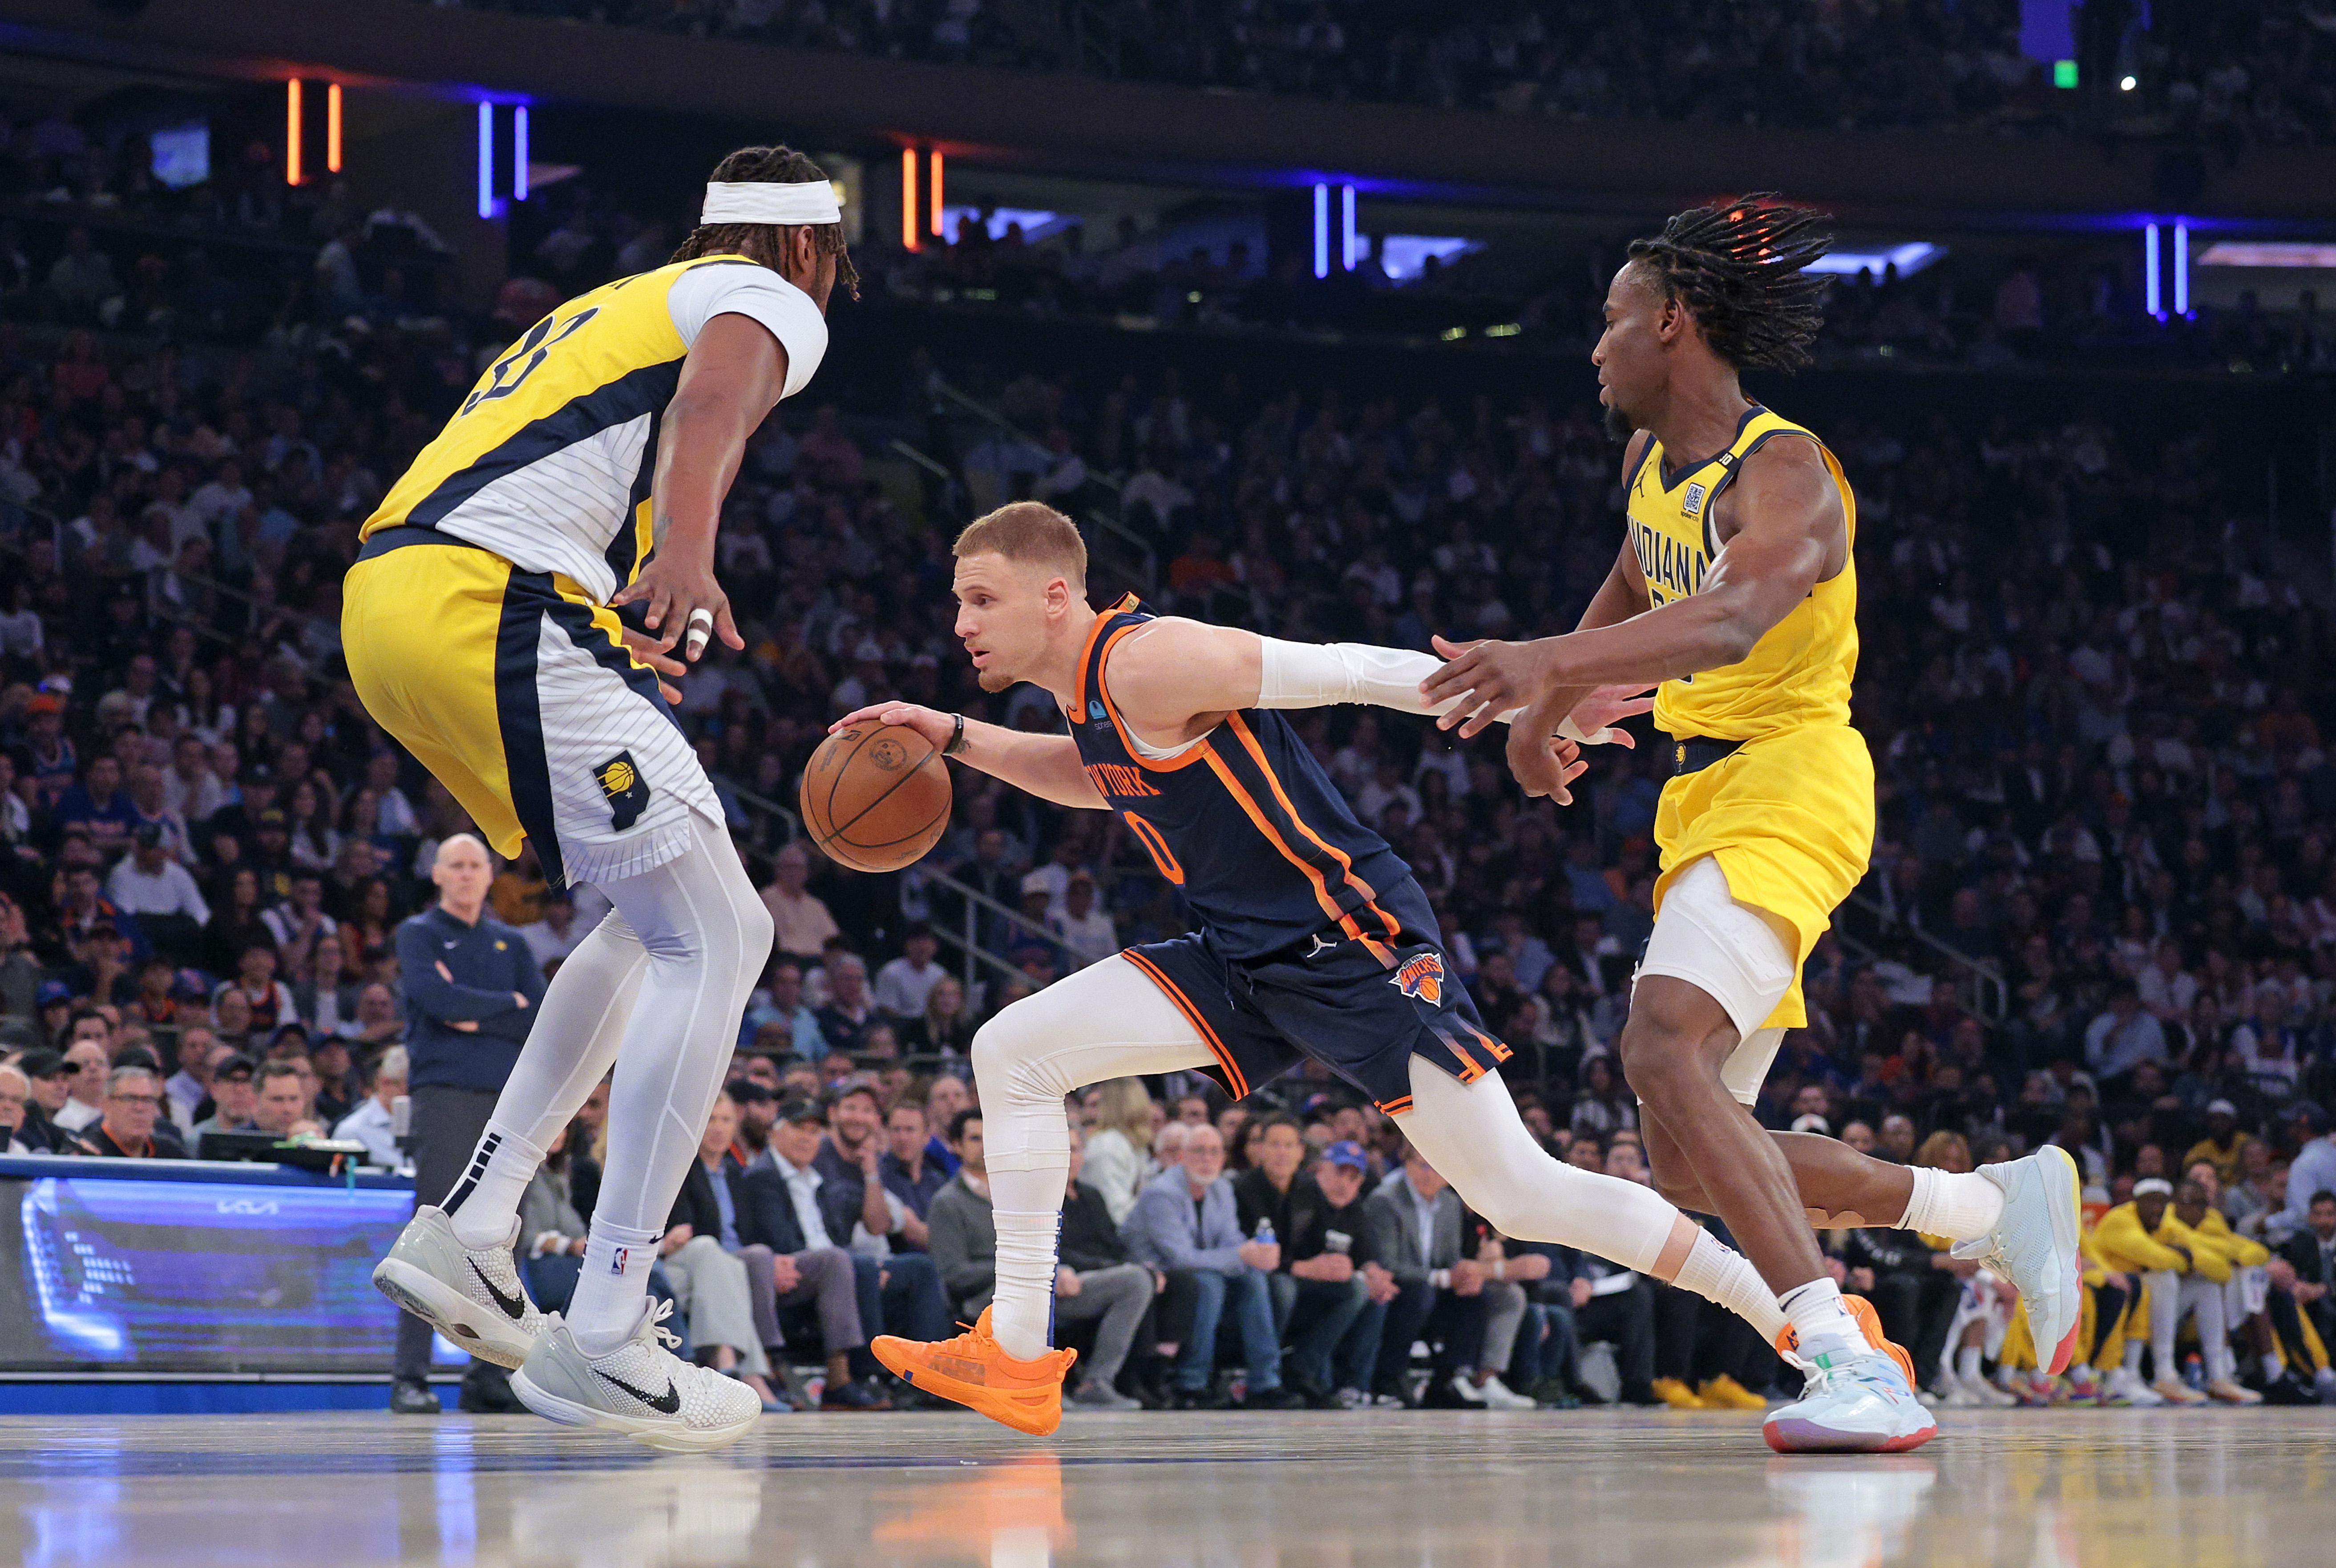 Indiana Pacers vs. New York Knicks at Madison Square garden - New York Knicks guard Donte DiVincenzo #0 drives down court during the first quarter.